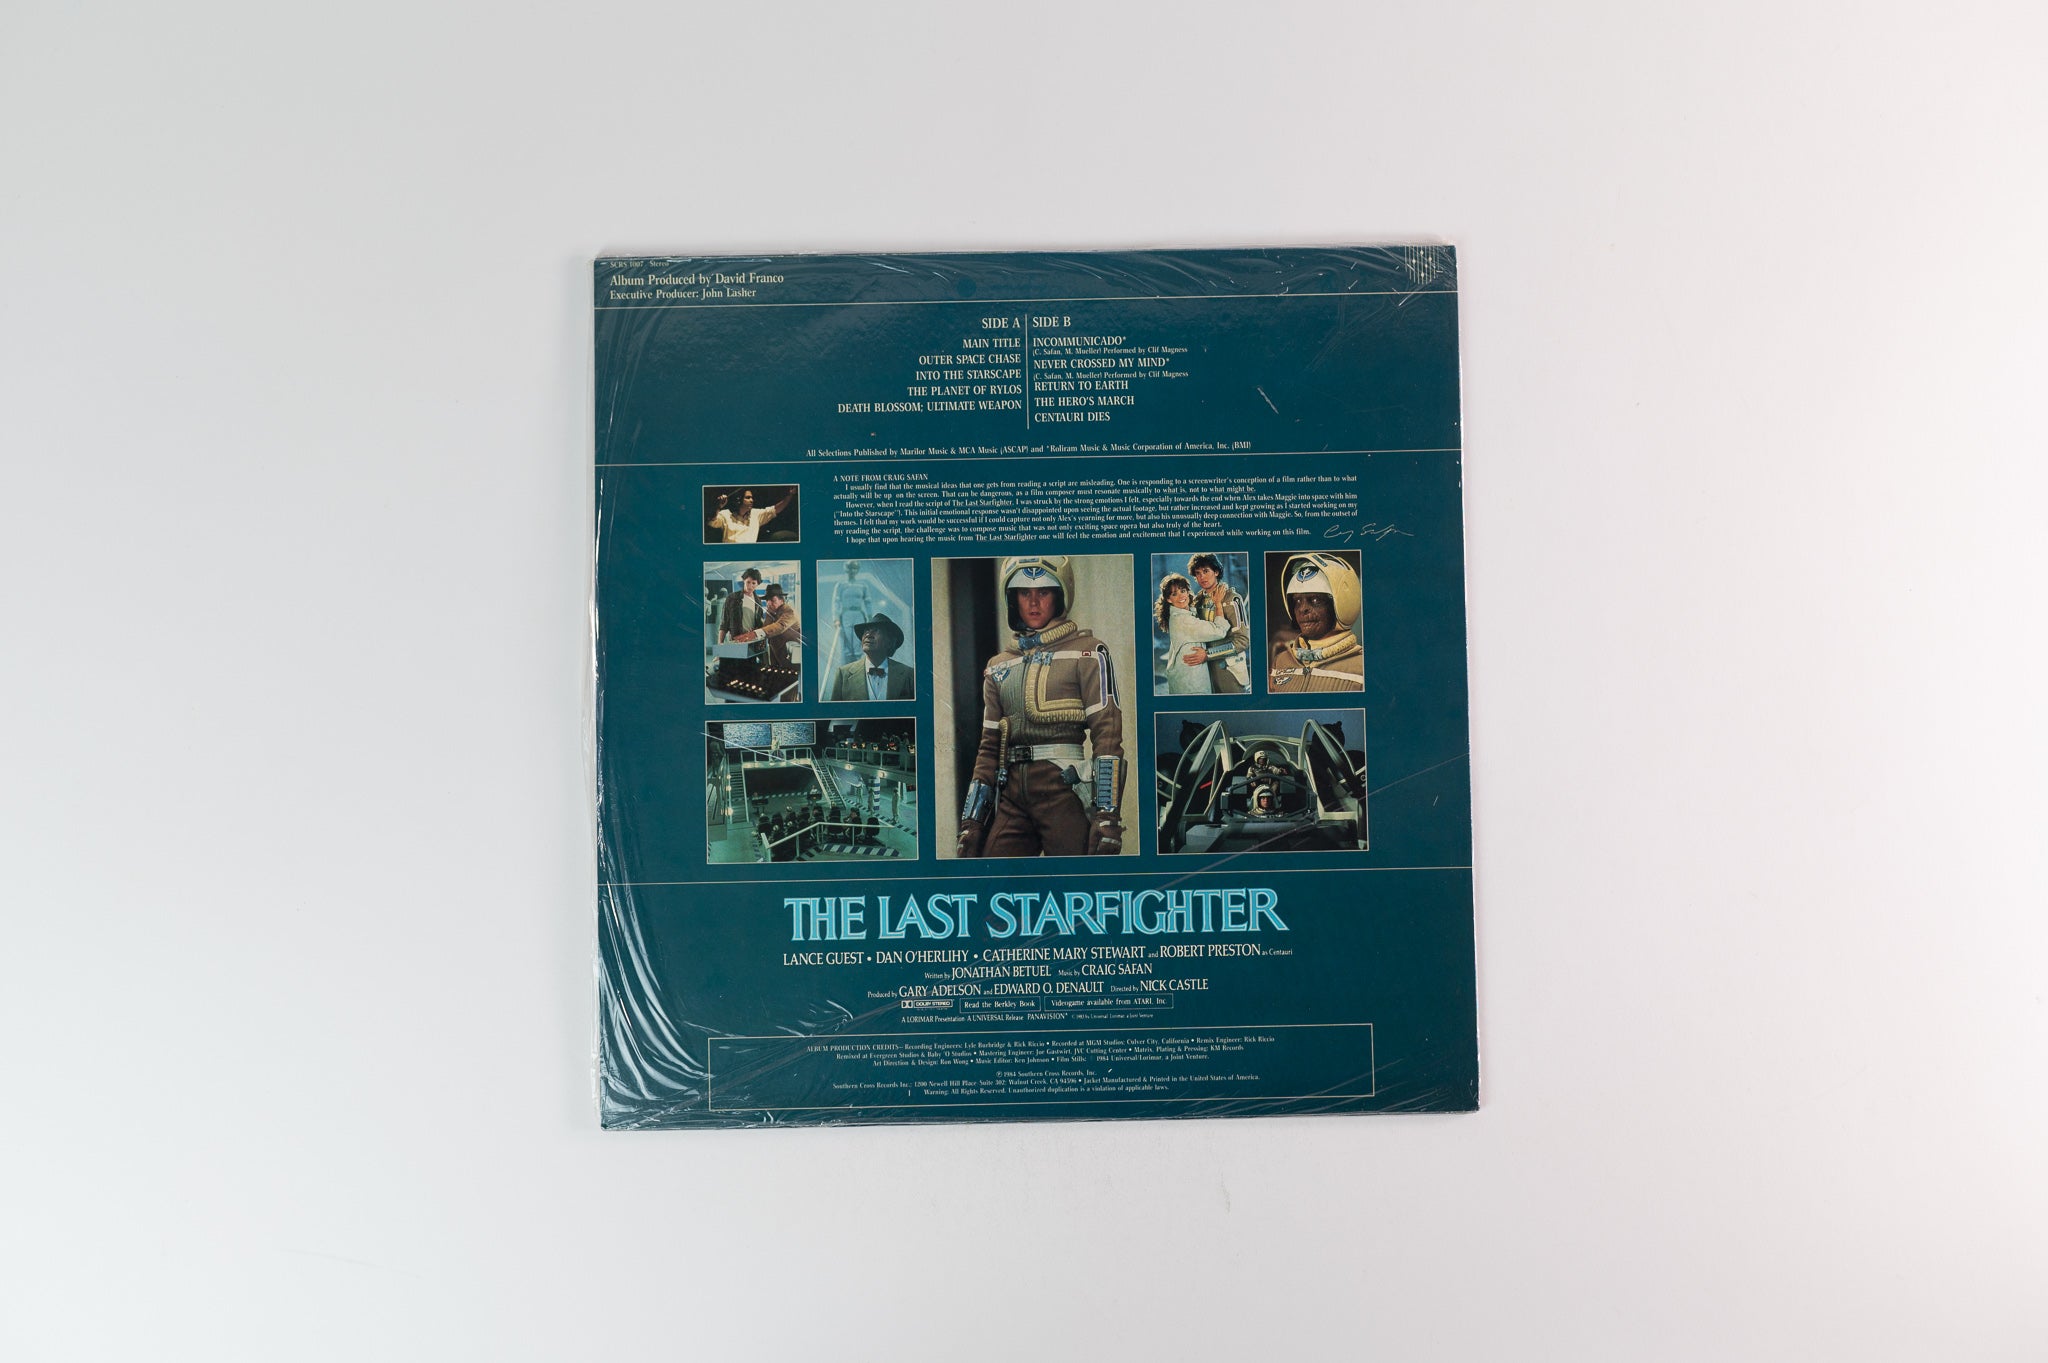 Craig Safan - The Last Starfighter (Original Motion Picture Soundtrack) on Southern Cross Sealed